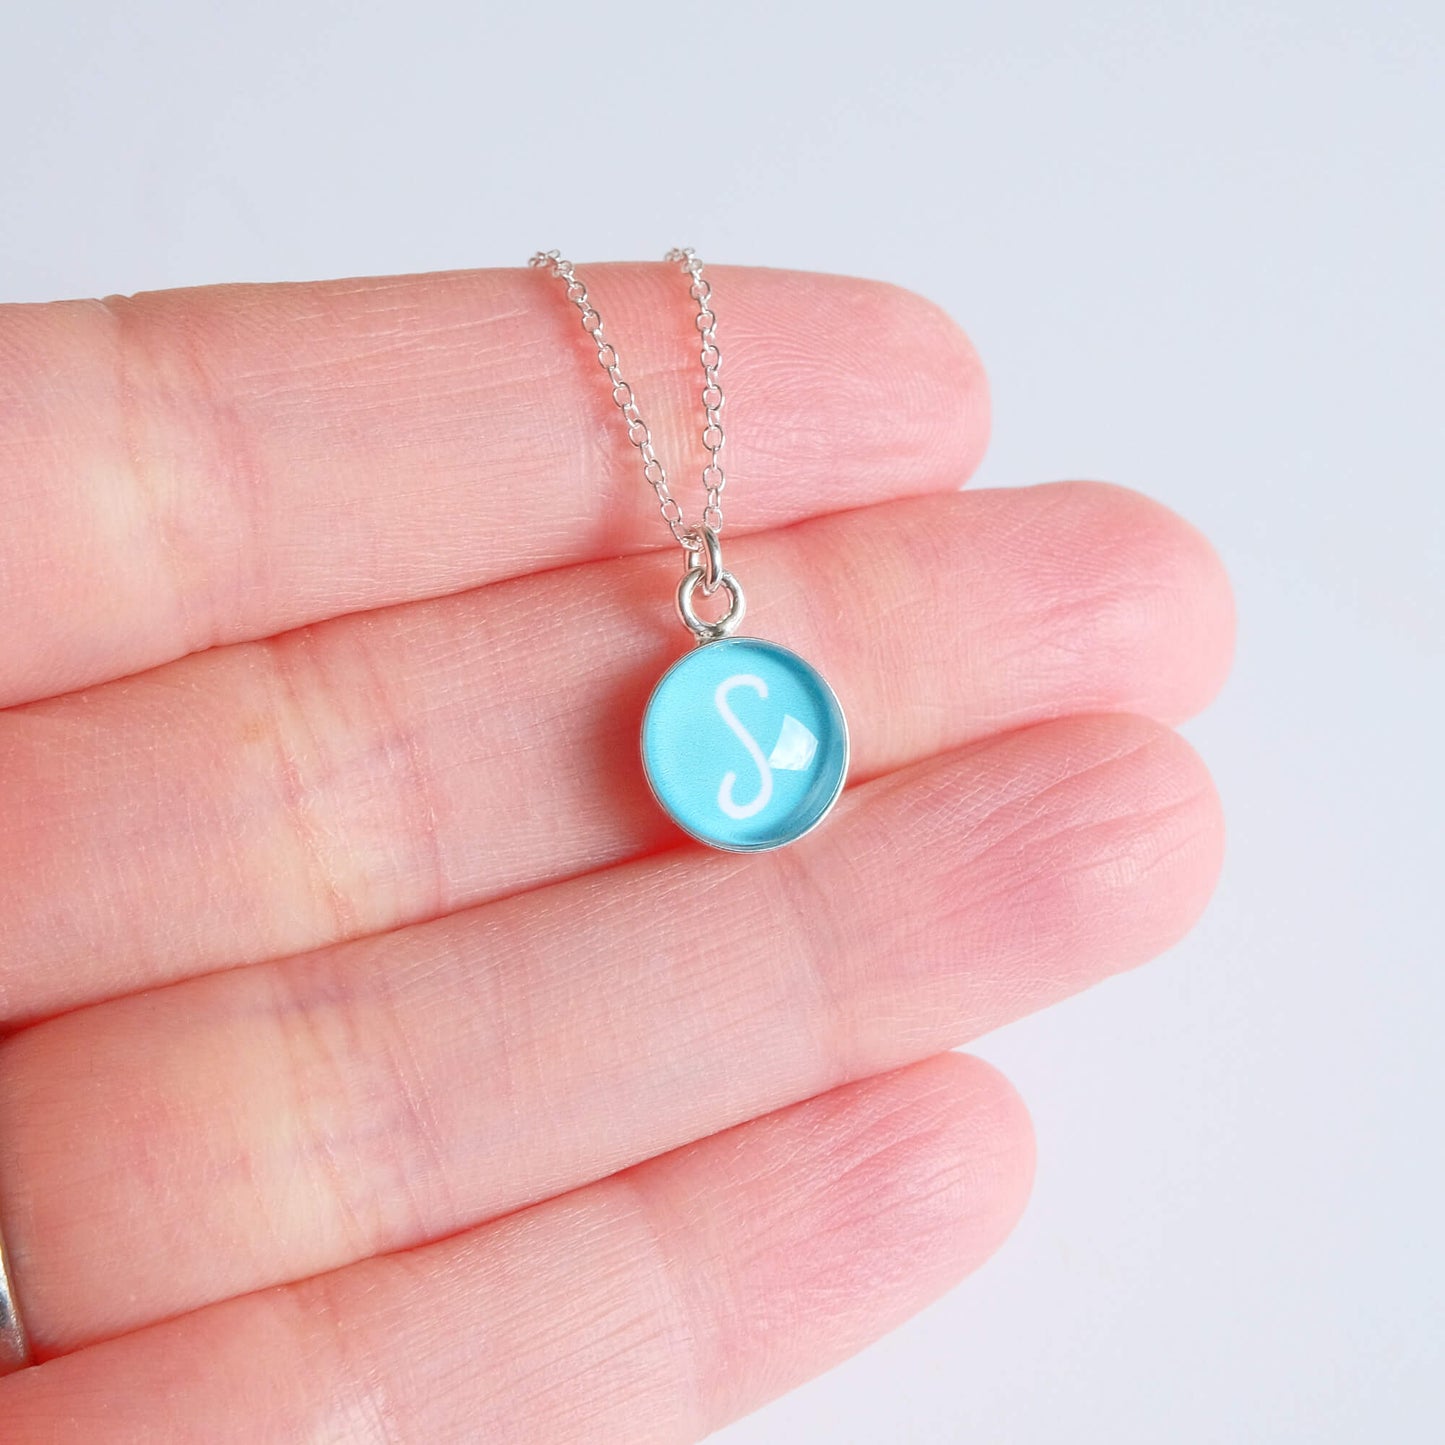 Sterling Silver Colour and Initial Necklace